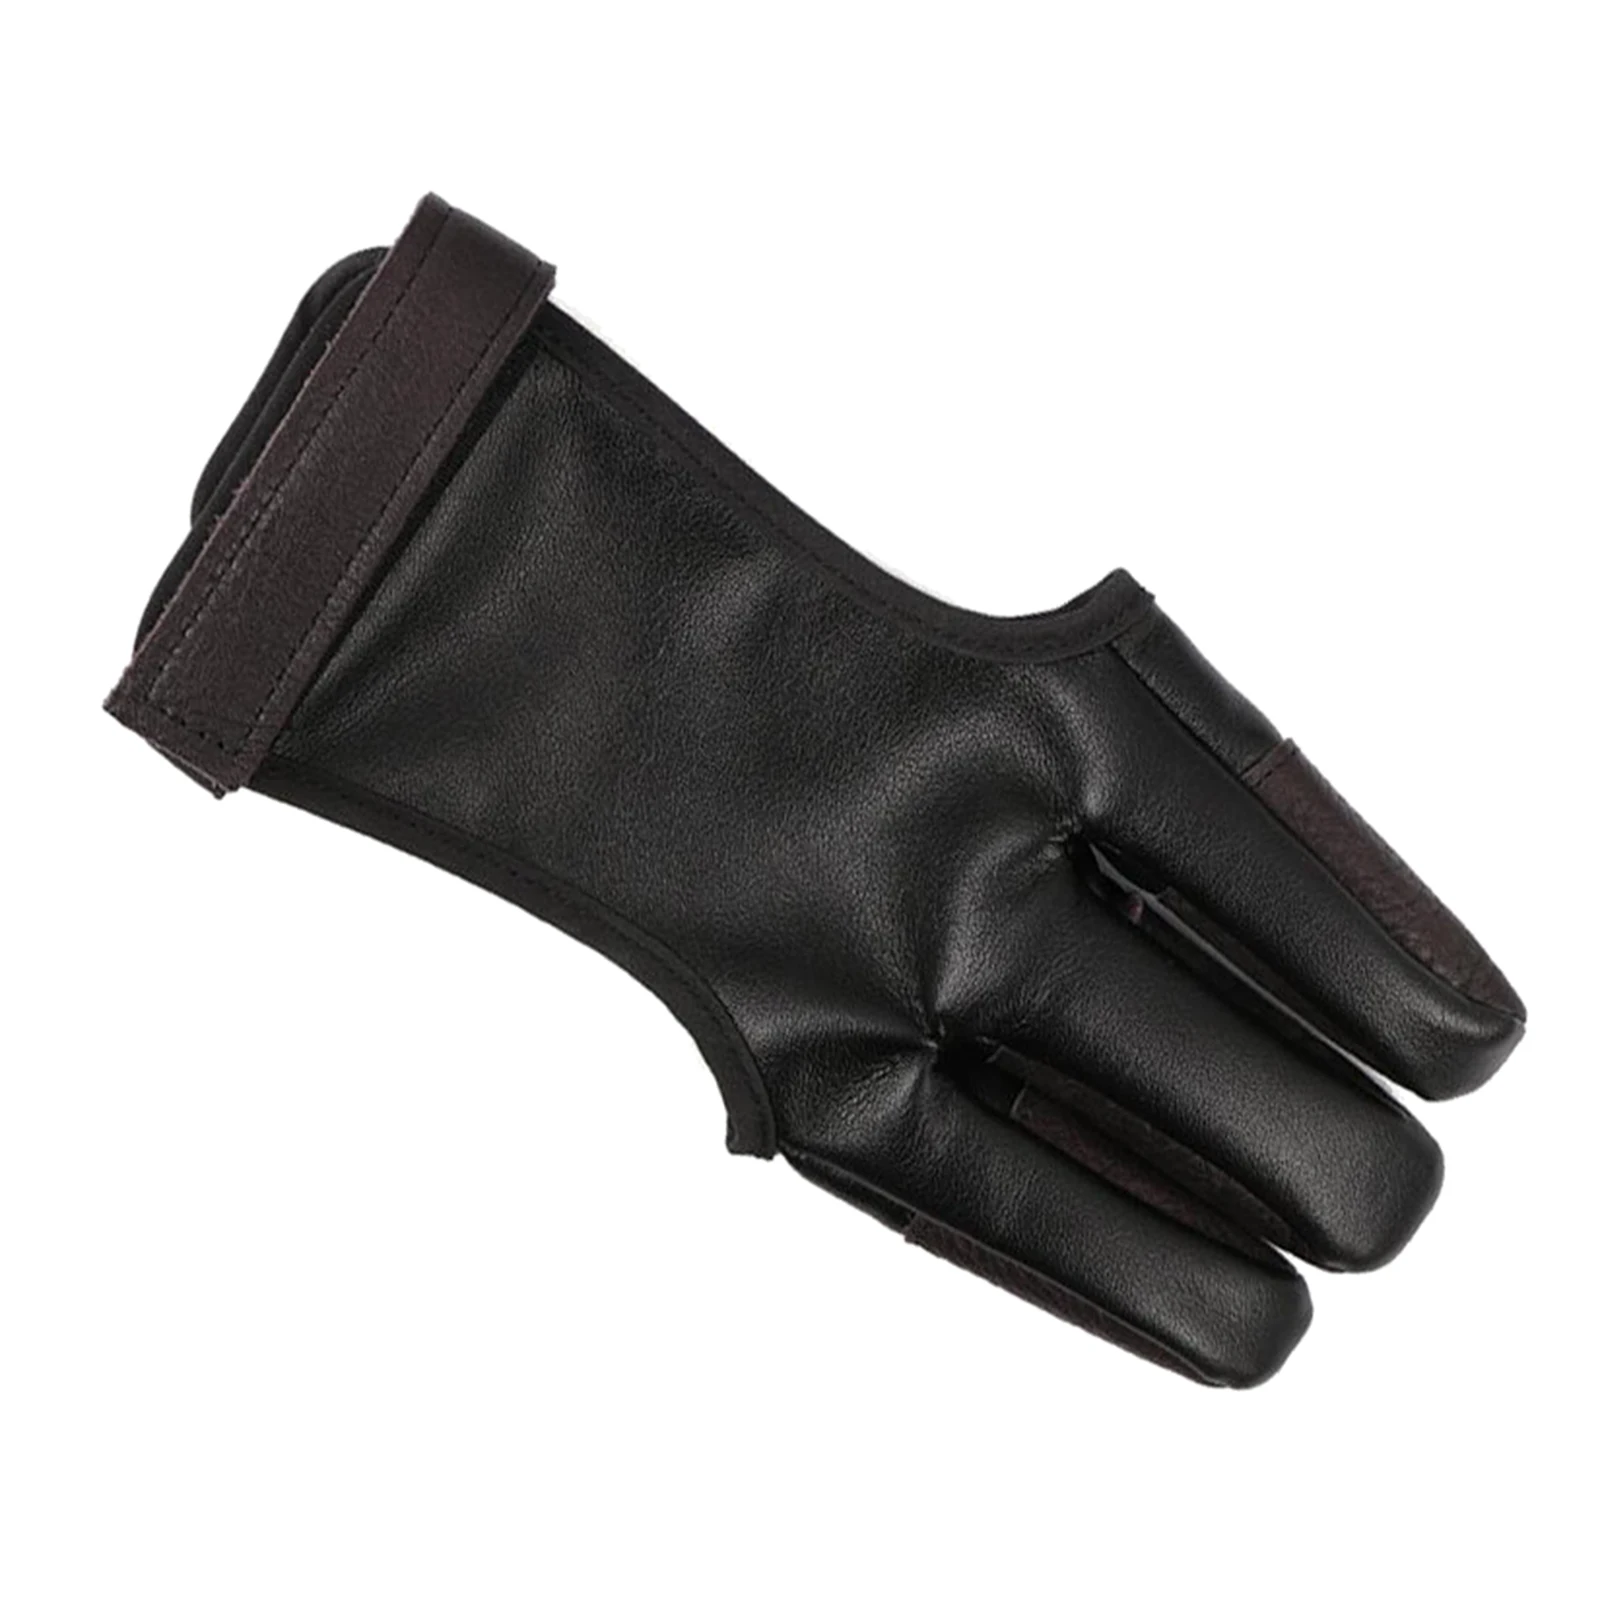 ARCHERS LEATHER SHOOTING 4 FINGER GLOVE HUNTING BOW GLOVES RIGHT & LEFT HAND 